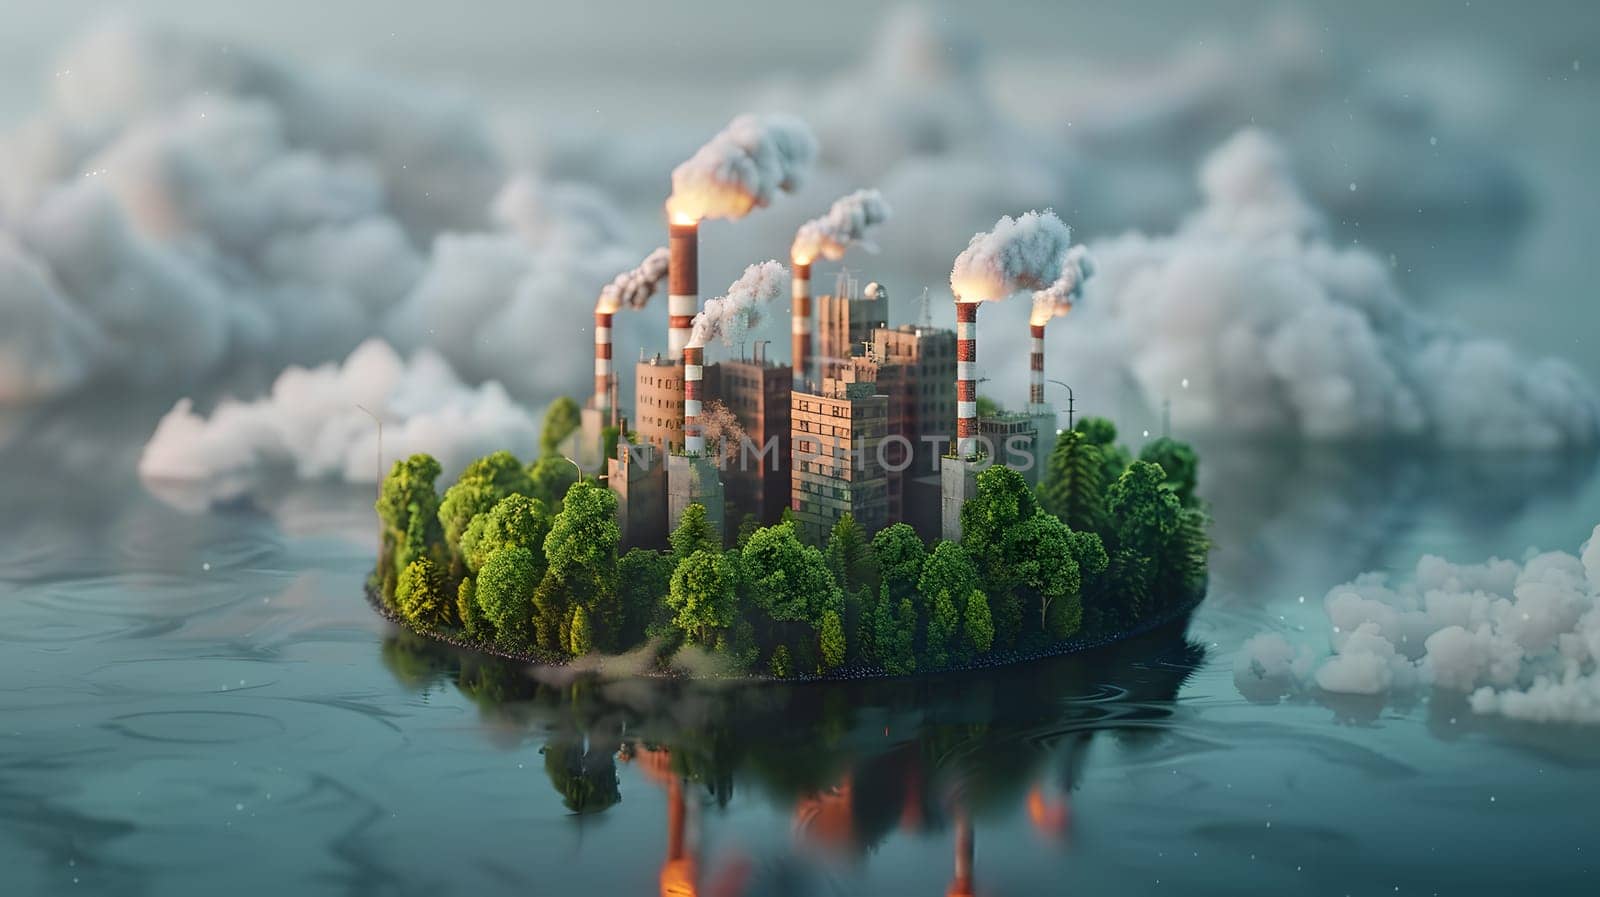 A small island with a factory on it is drifting in the water below a cloudy sky, blending the industrial building into the surrounding natural landscape